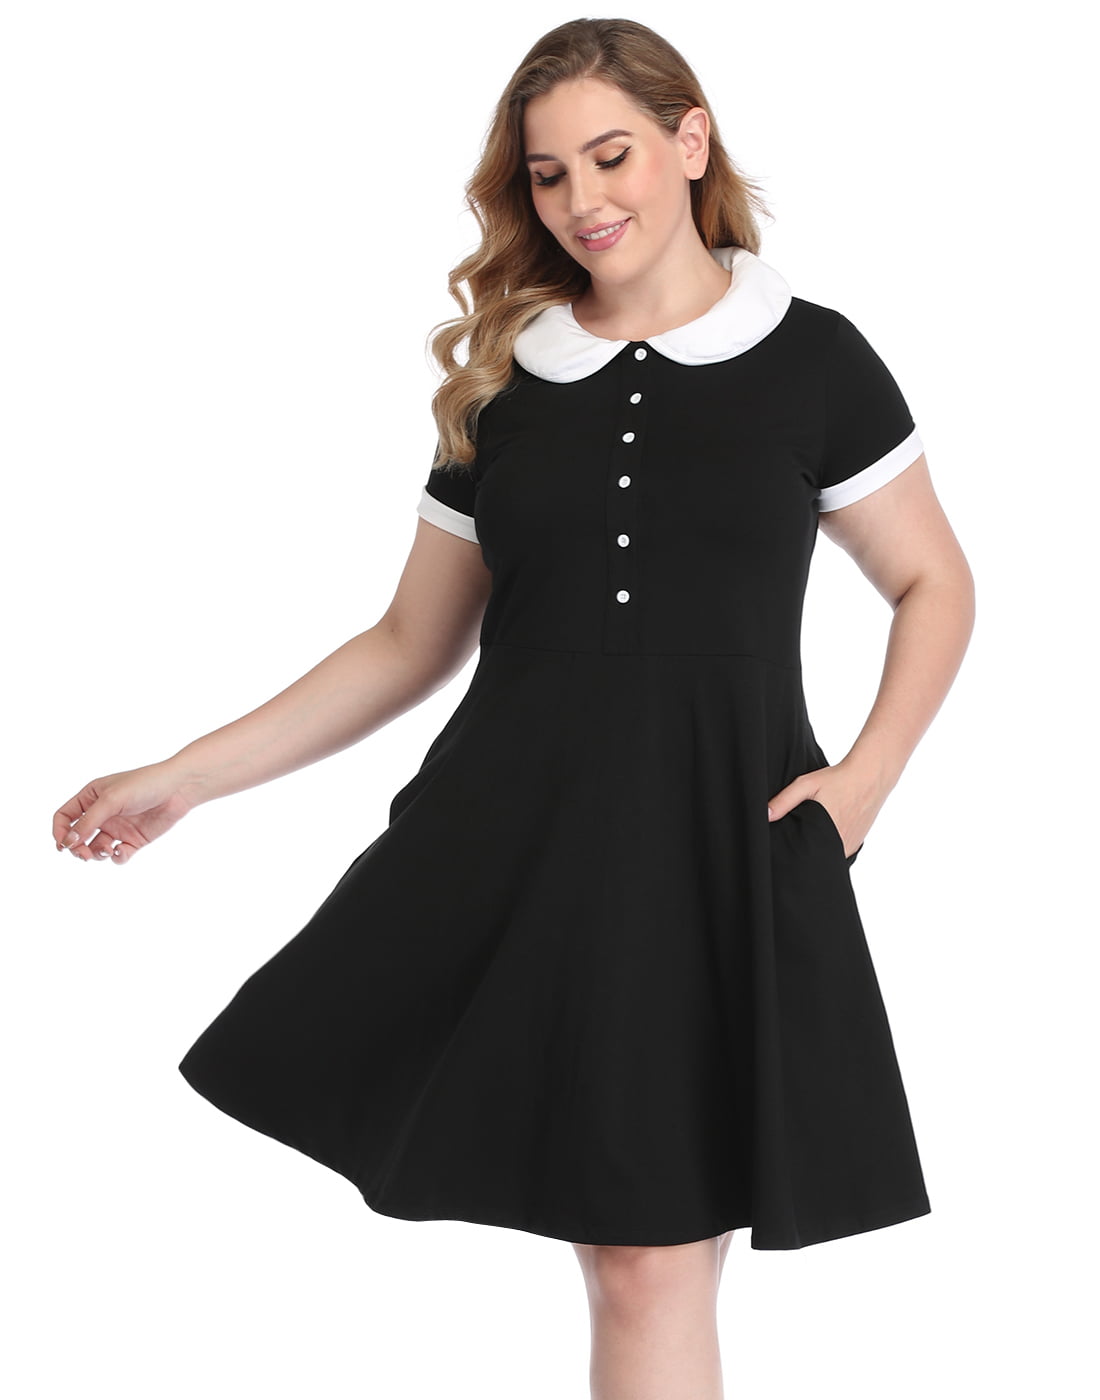 black fitted dress plus size